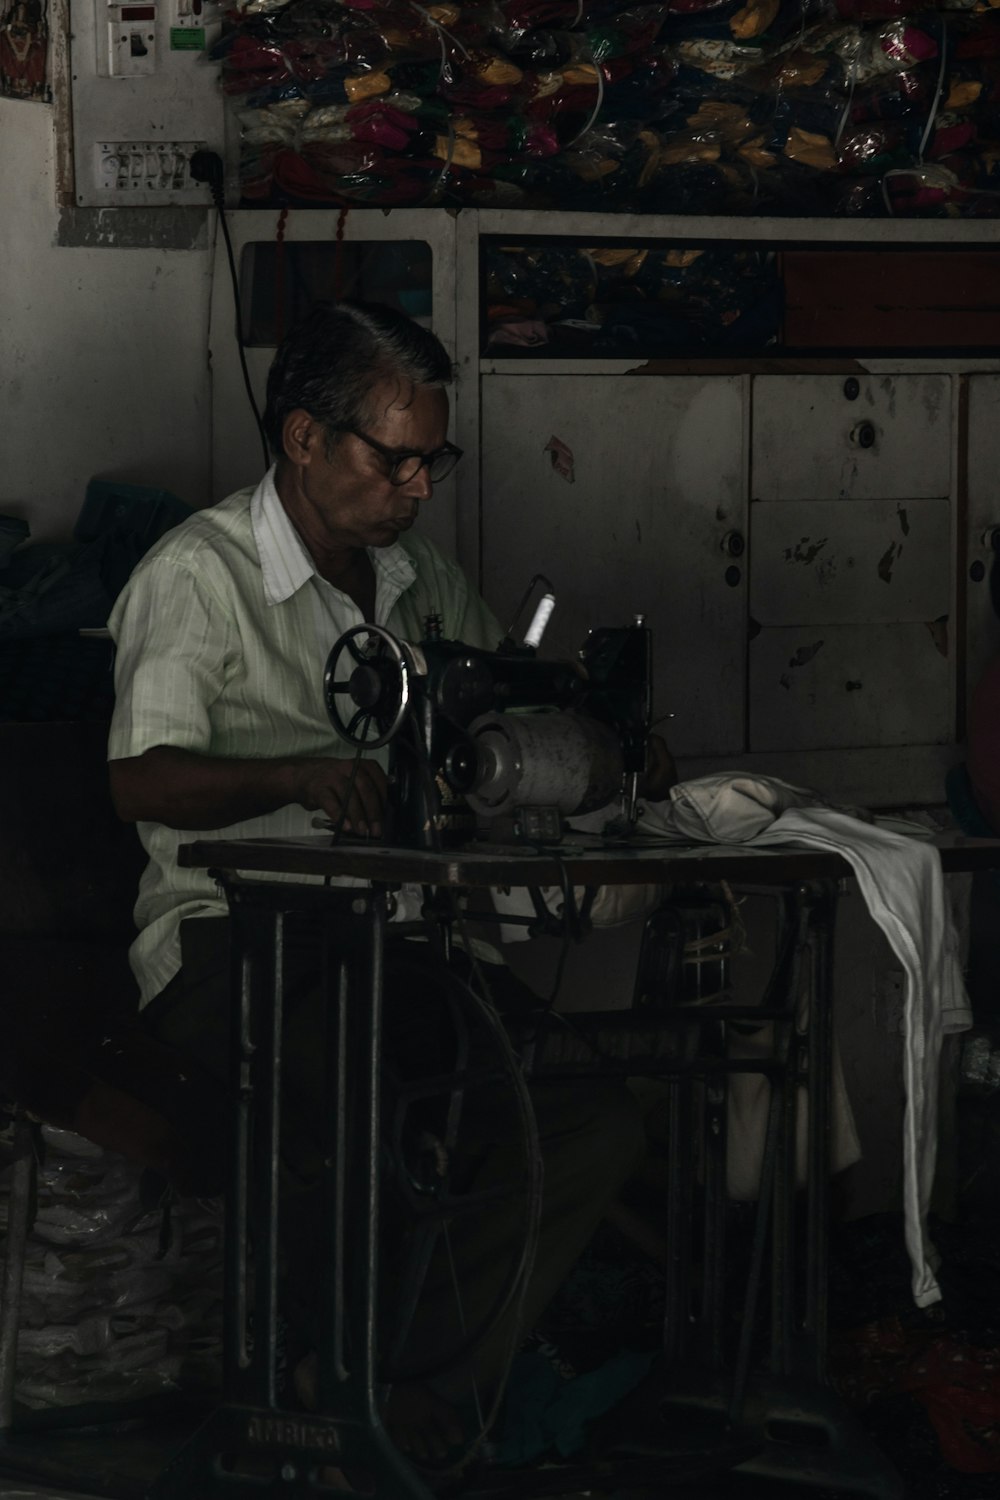 man sitting on chair working on sewing machine